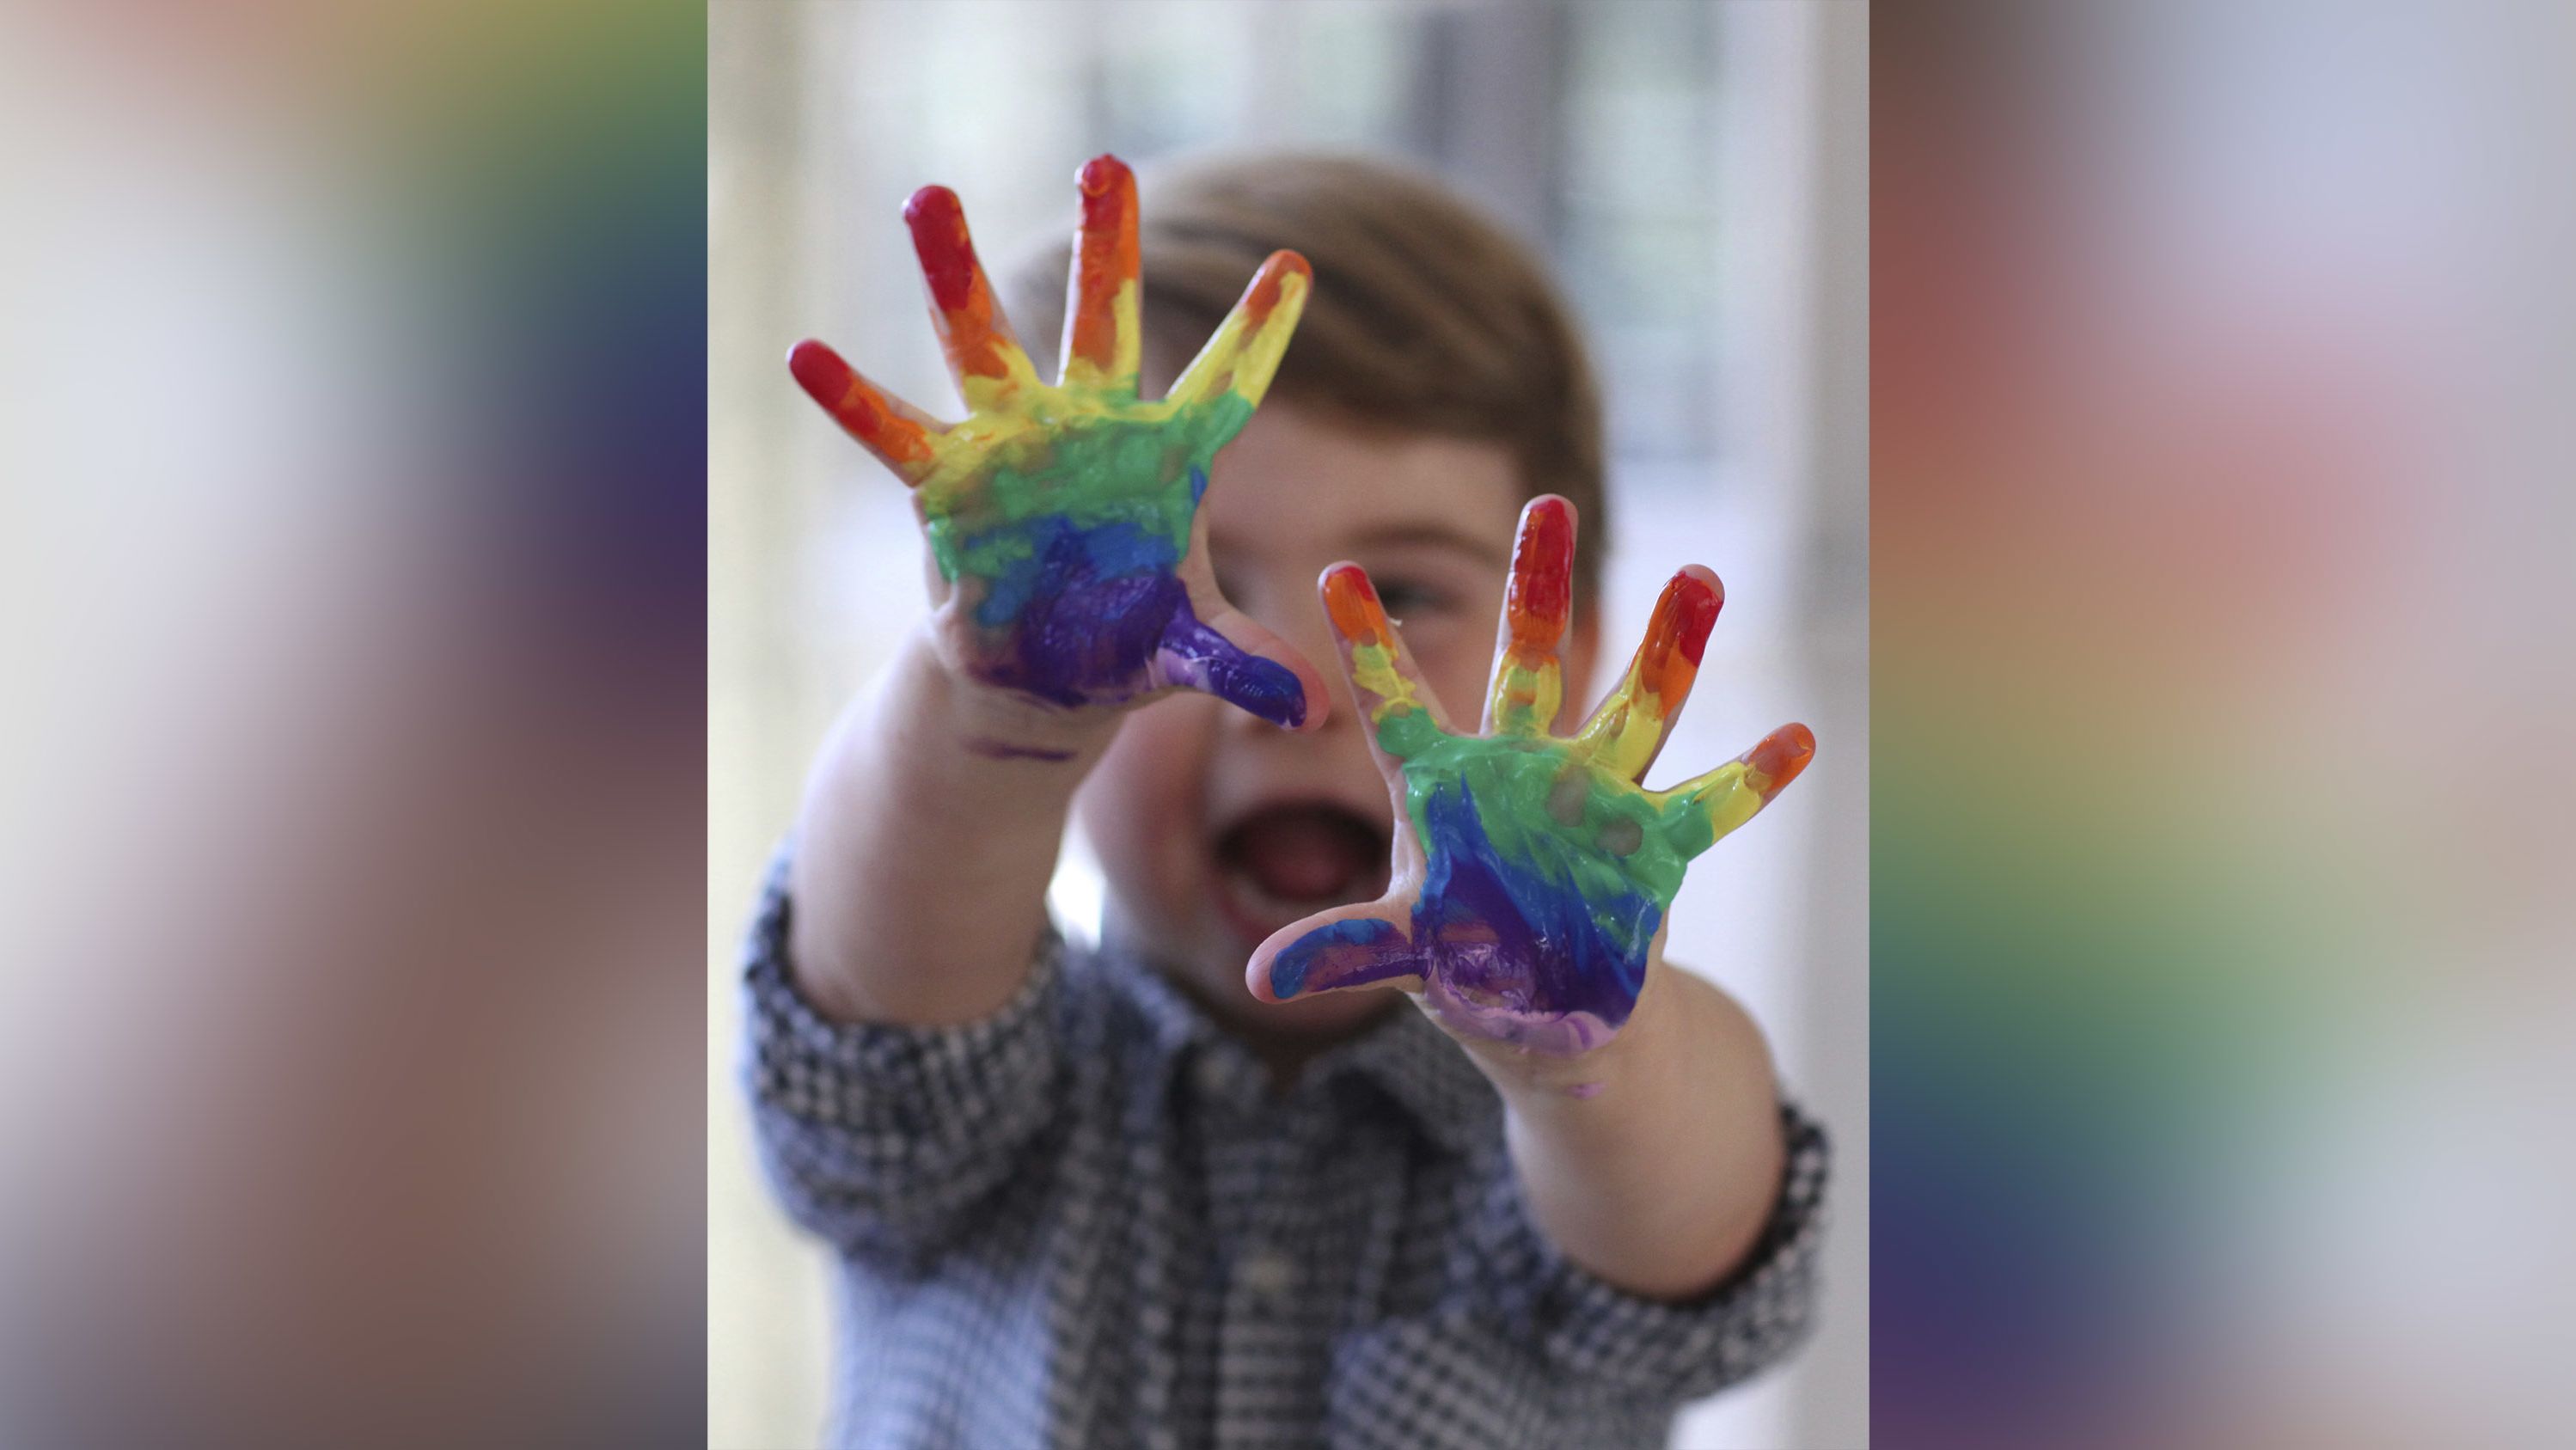 Prince Louis painted a rainbow in photos released to mark his second birthday.